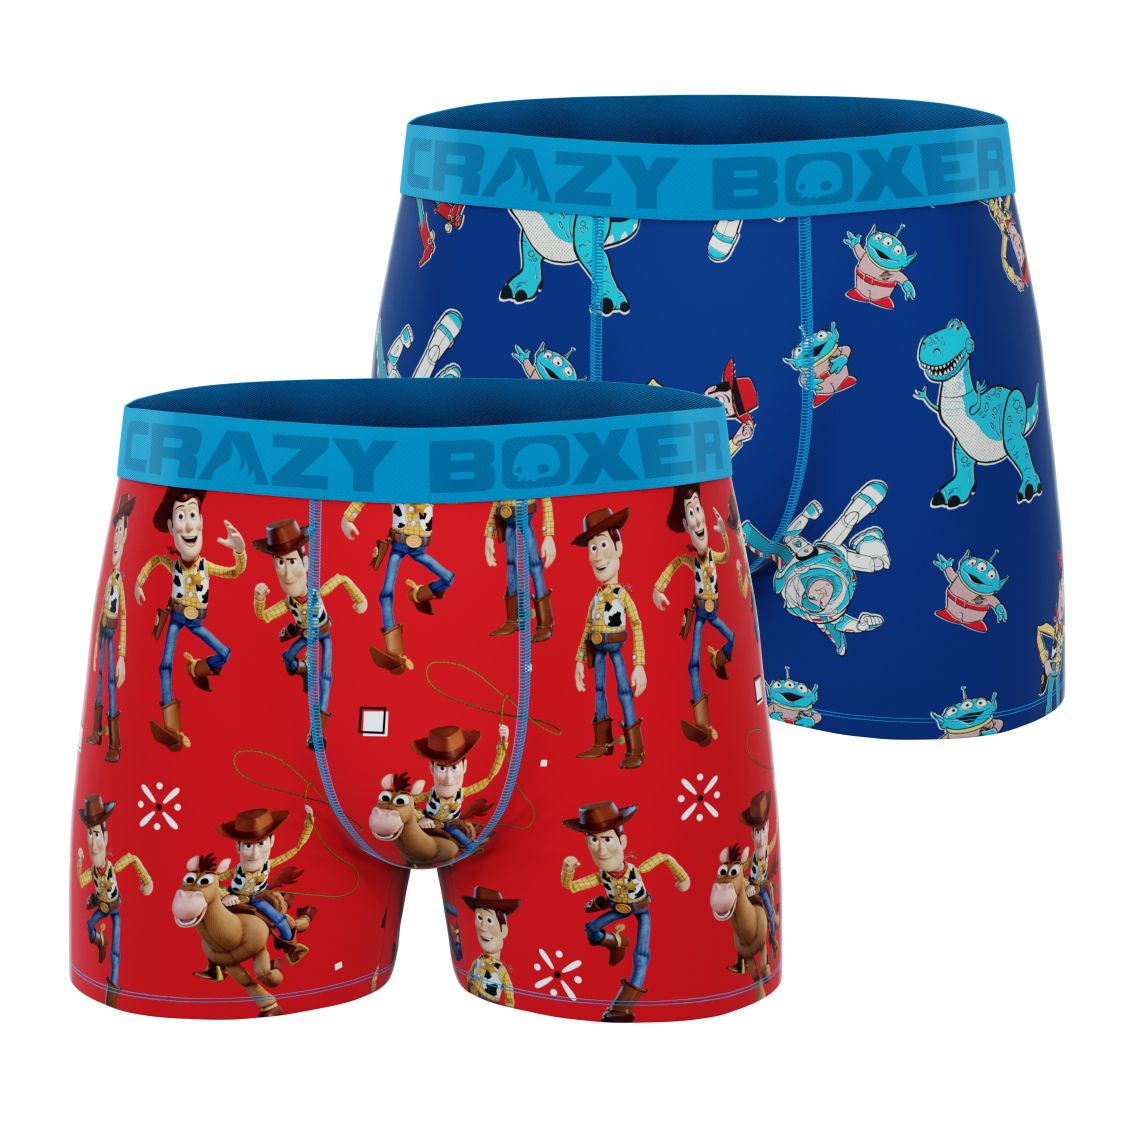 CRAZYBOXER Toy Story All Characters Men's Boxer Briefs (2 pack)